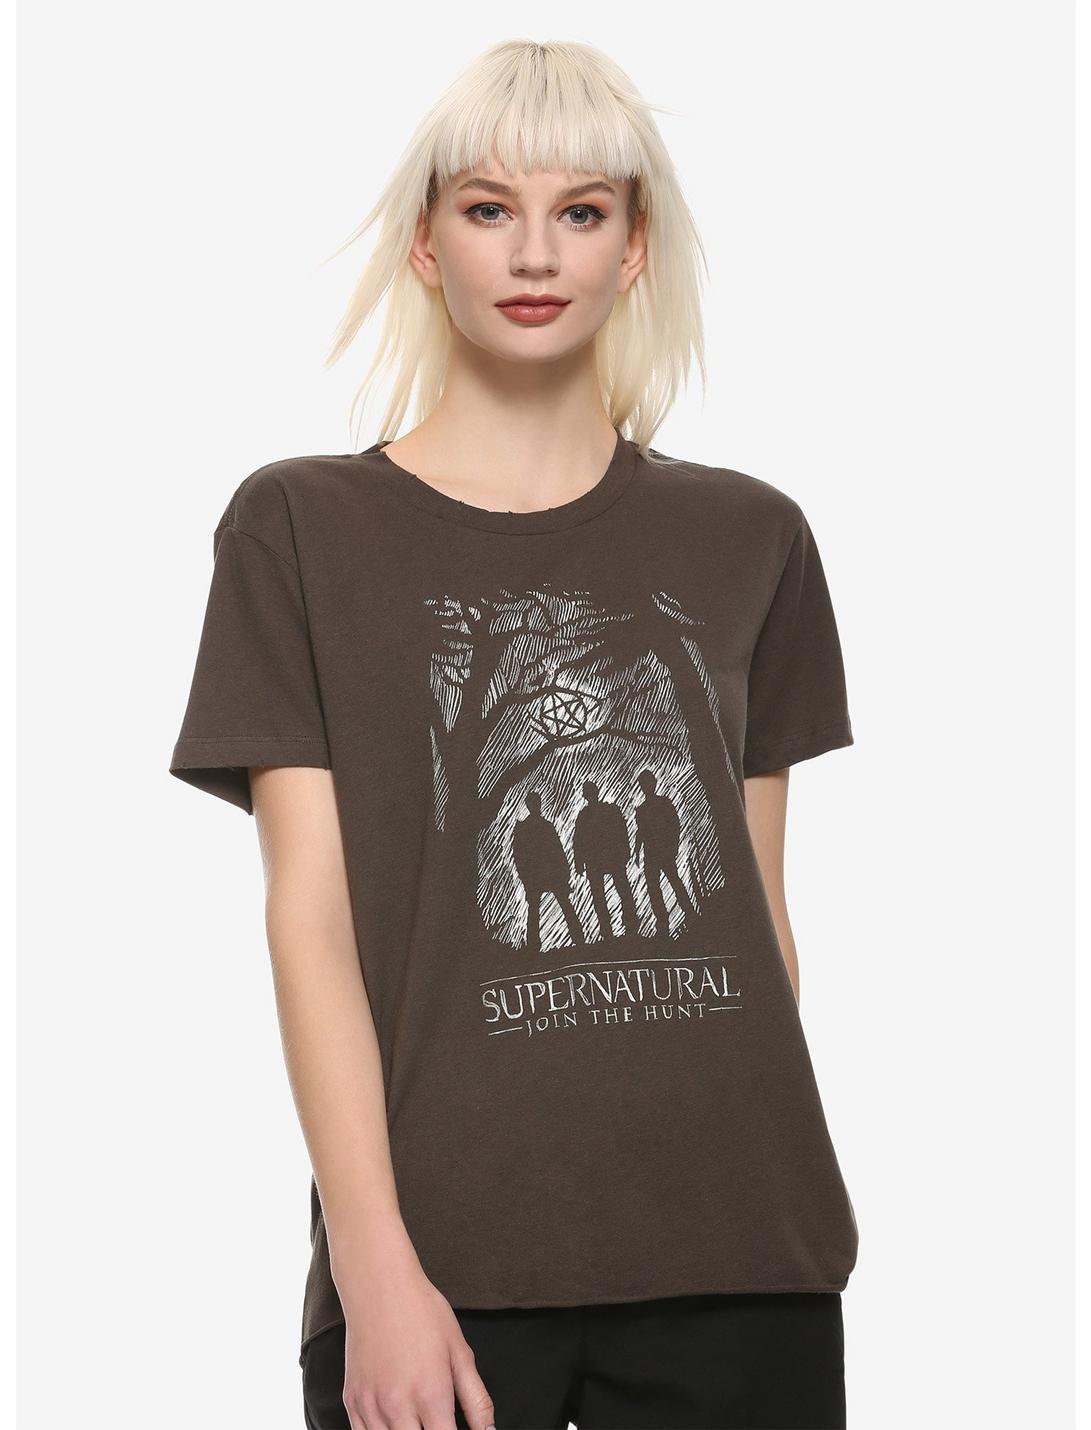 Supernatural Sketched Silhouettes Girls T-Shirt, WHITE, hi-res